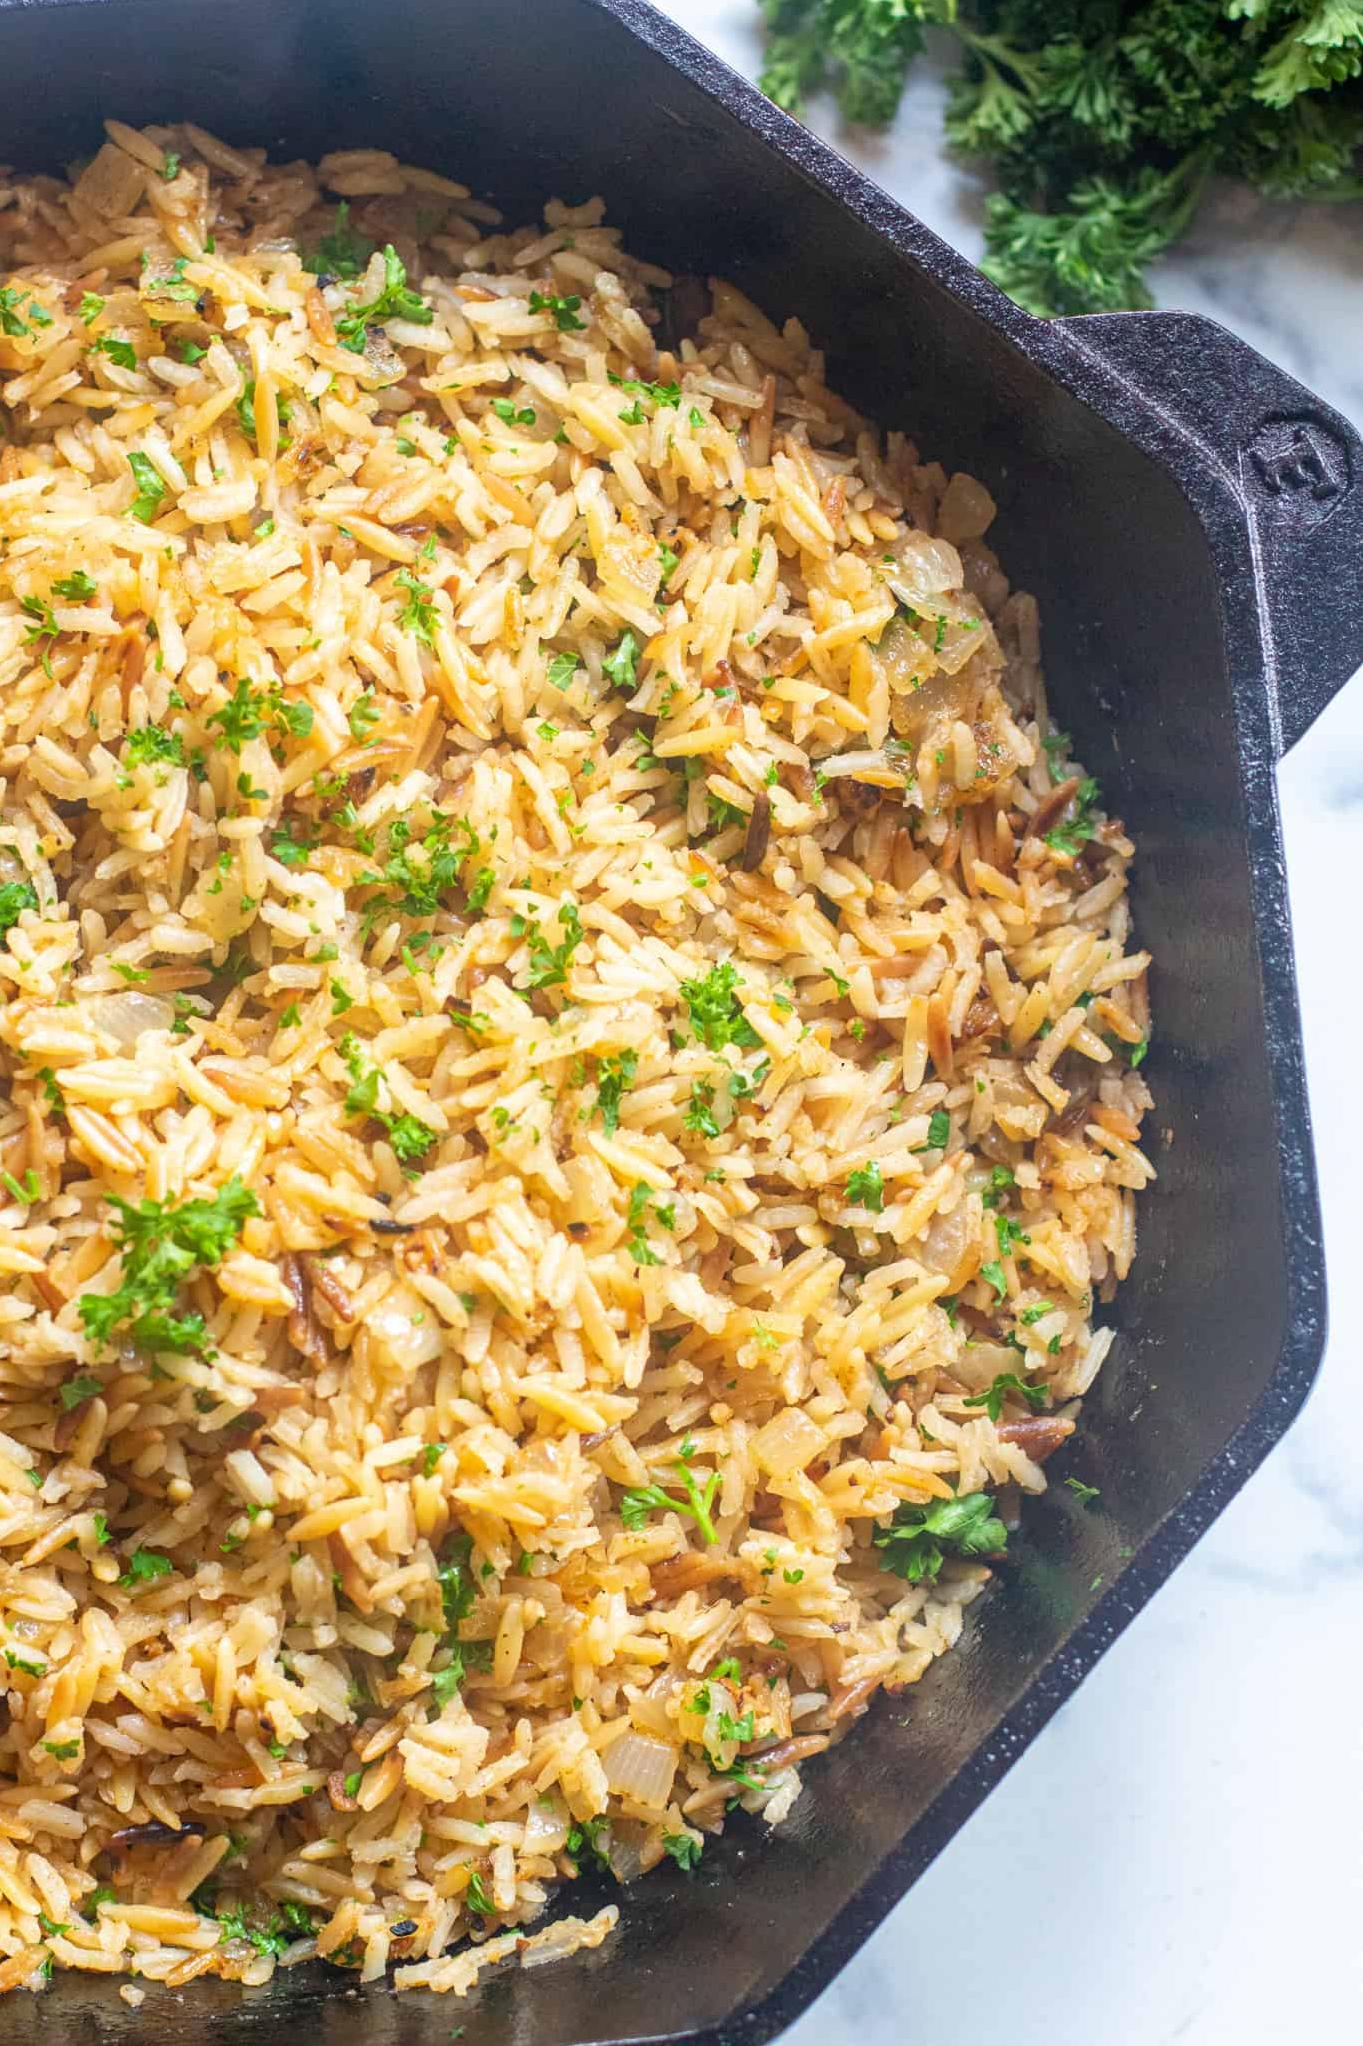  One pan and a few ingredients is all you need for this tasty rice pilaf.